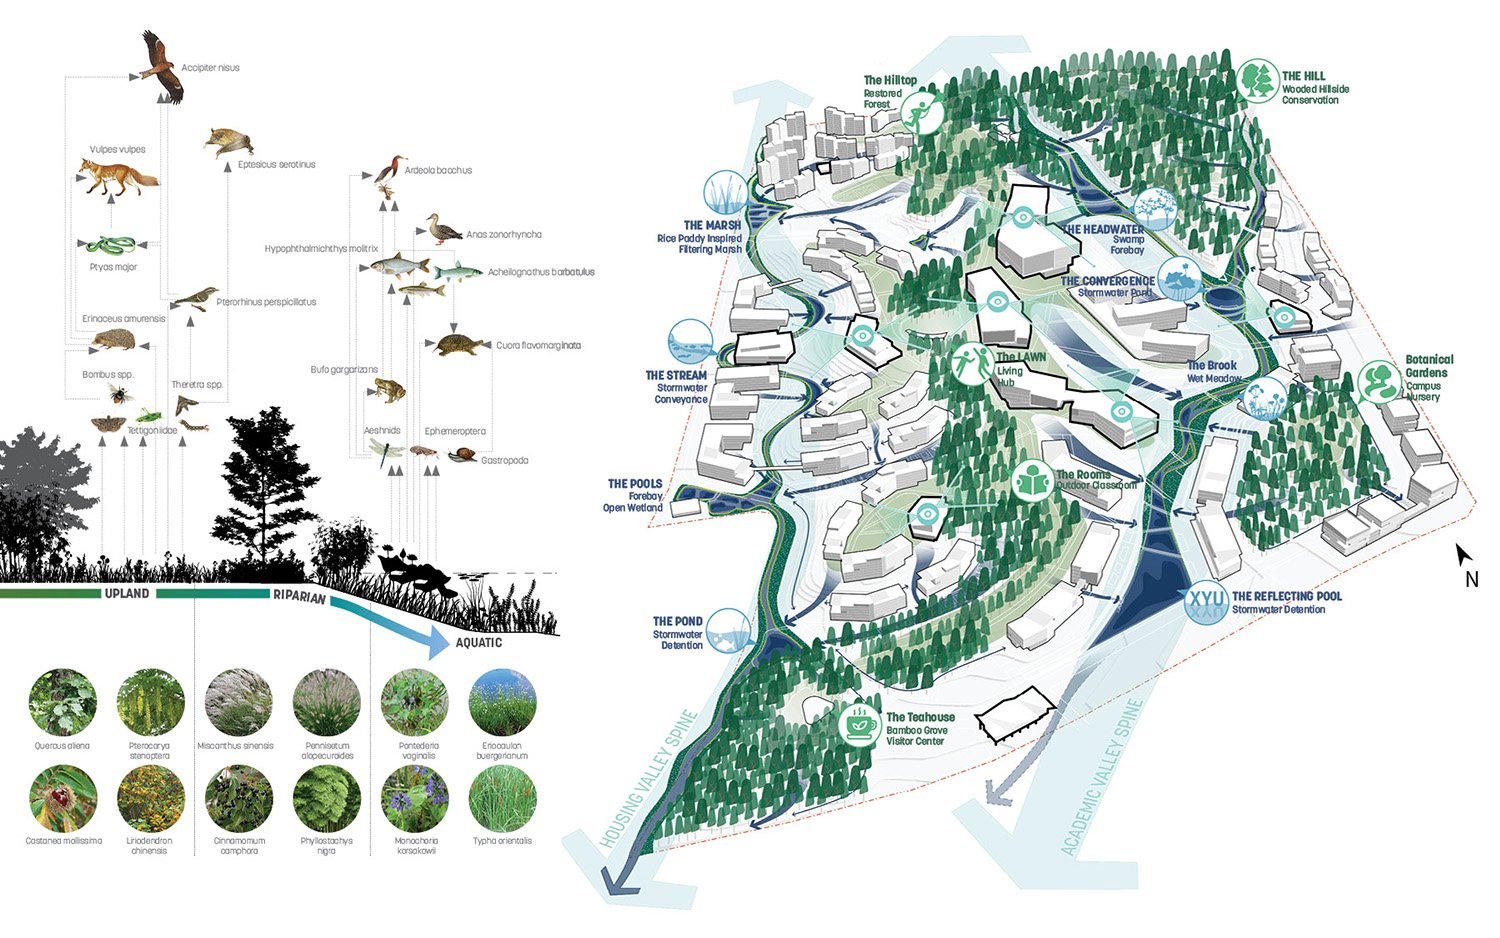 LANDSCAPE & ECOSYSTEM SERVICES: Topography and natural drainage play key roles in the campus planning to incorporate ecologically enriching landscapes. | SASAKI